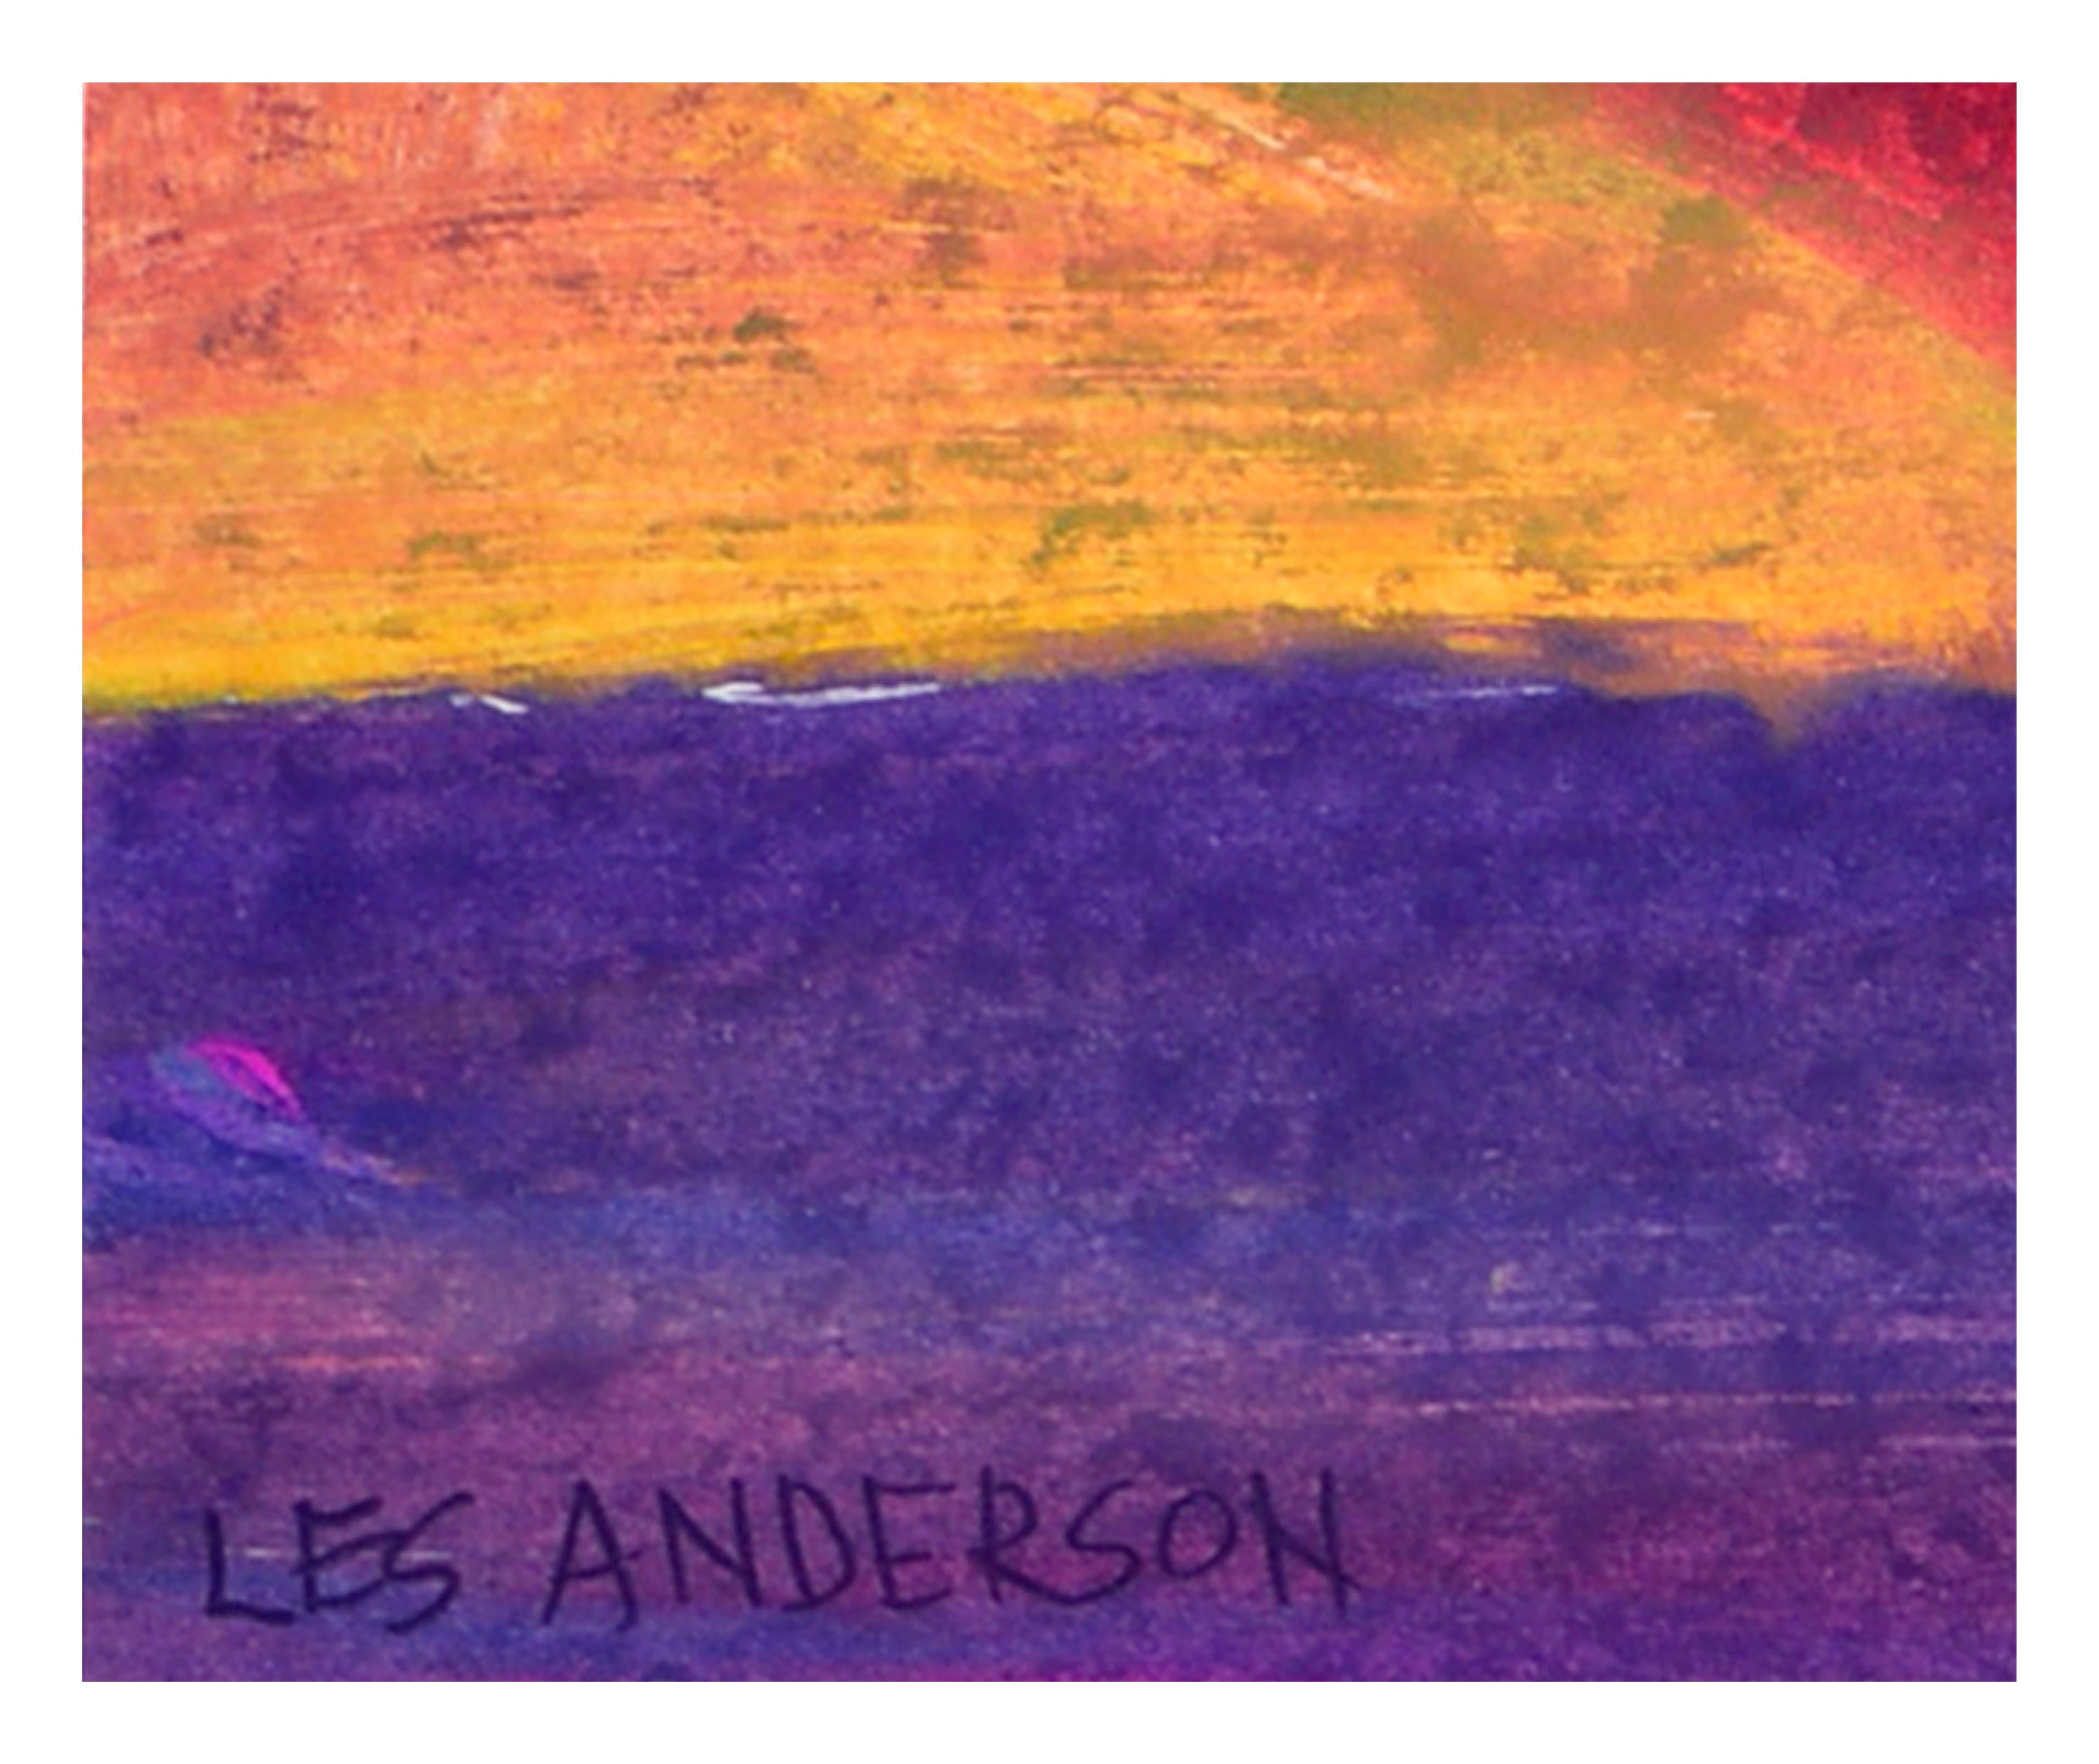 Multi Colored Grid Abstract - Abstract Expressionist Art by Les Anderson